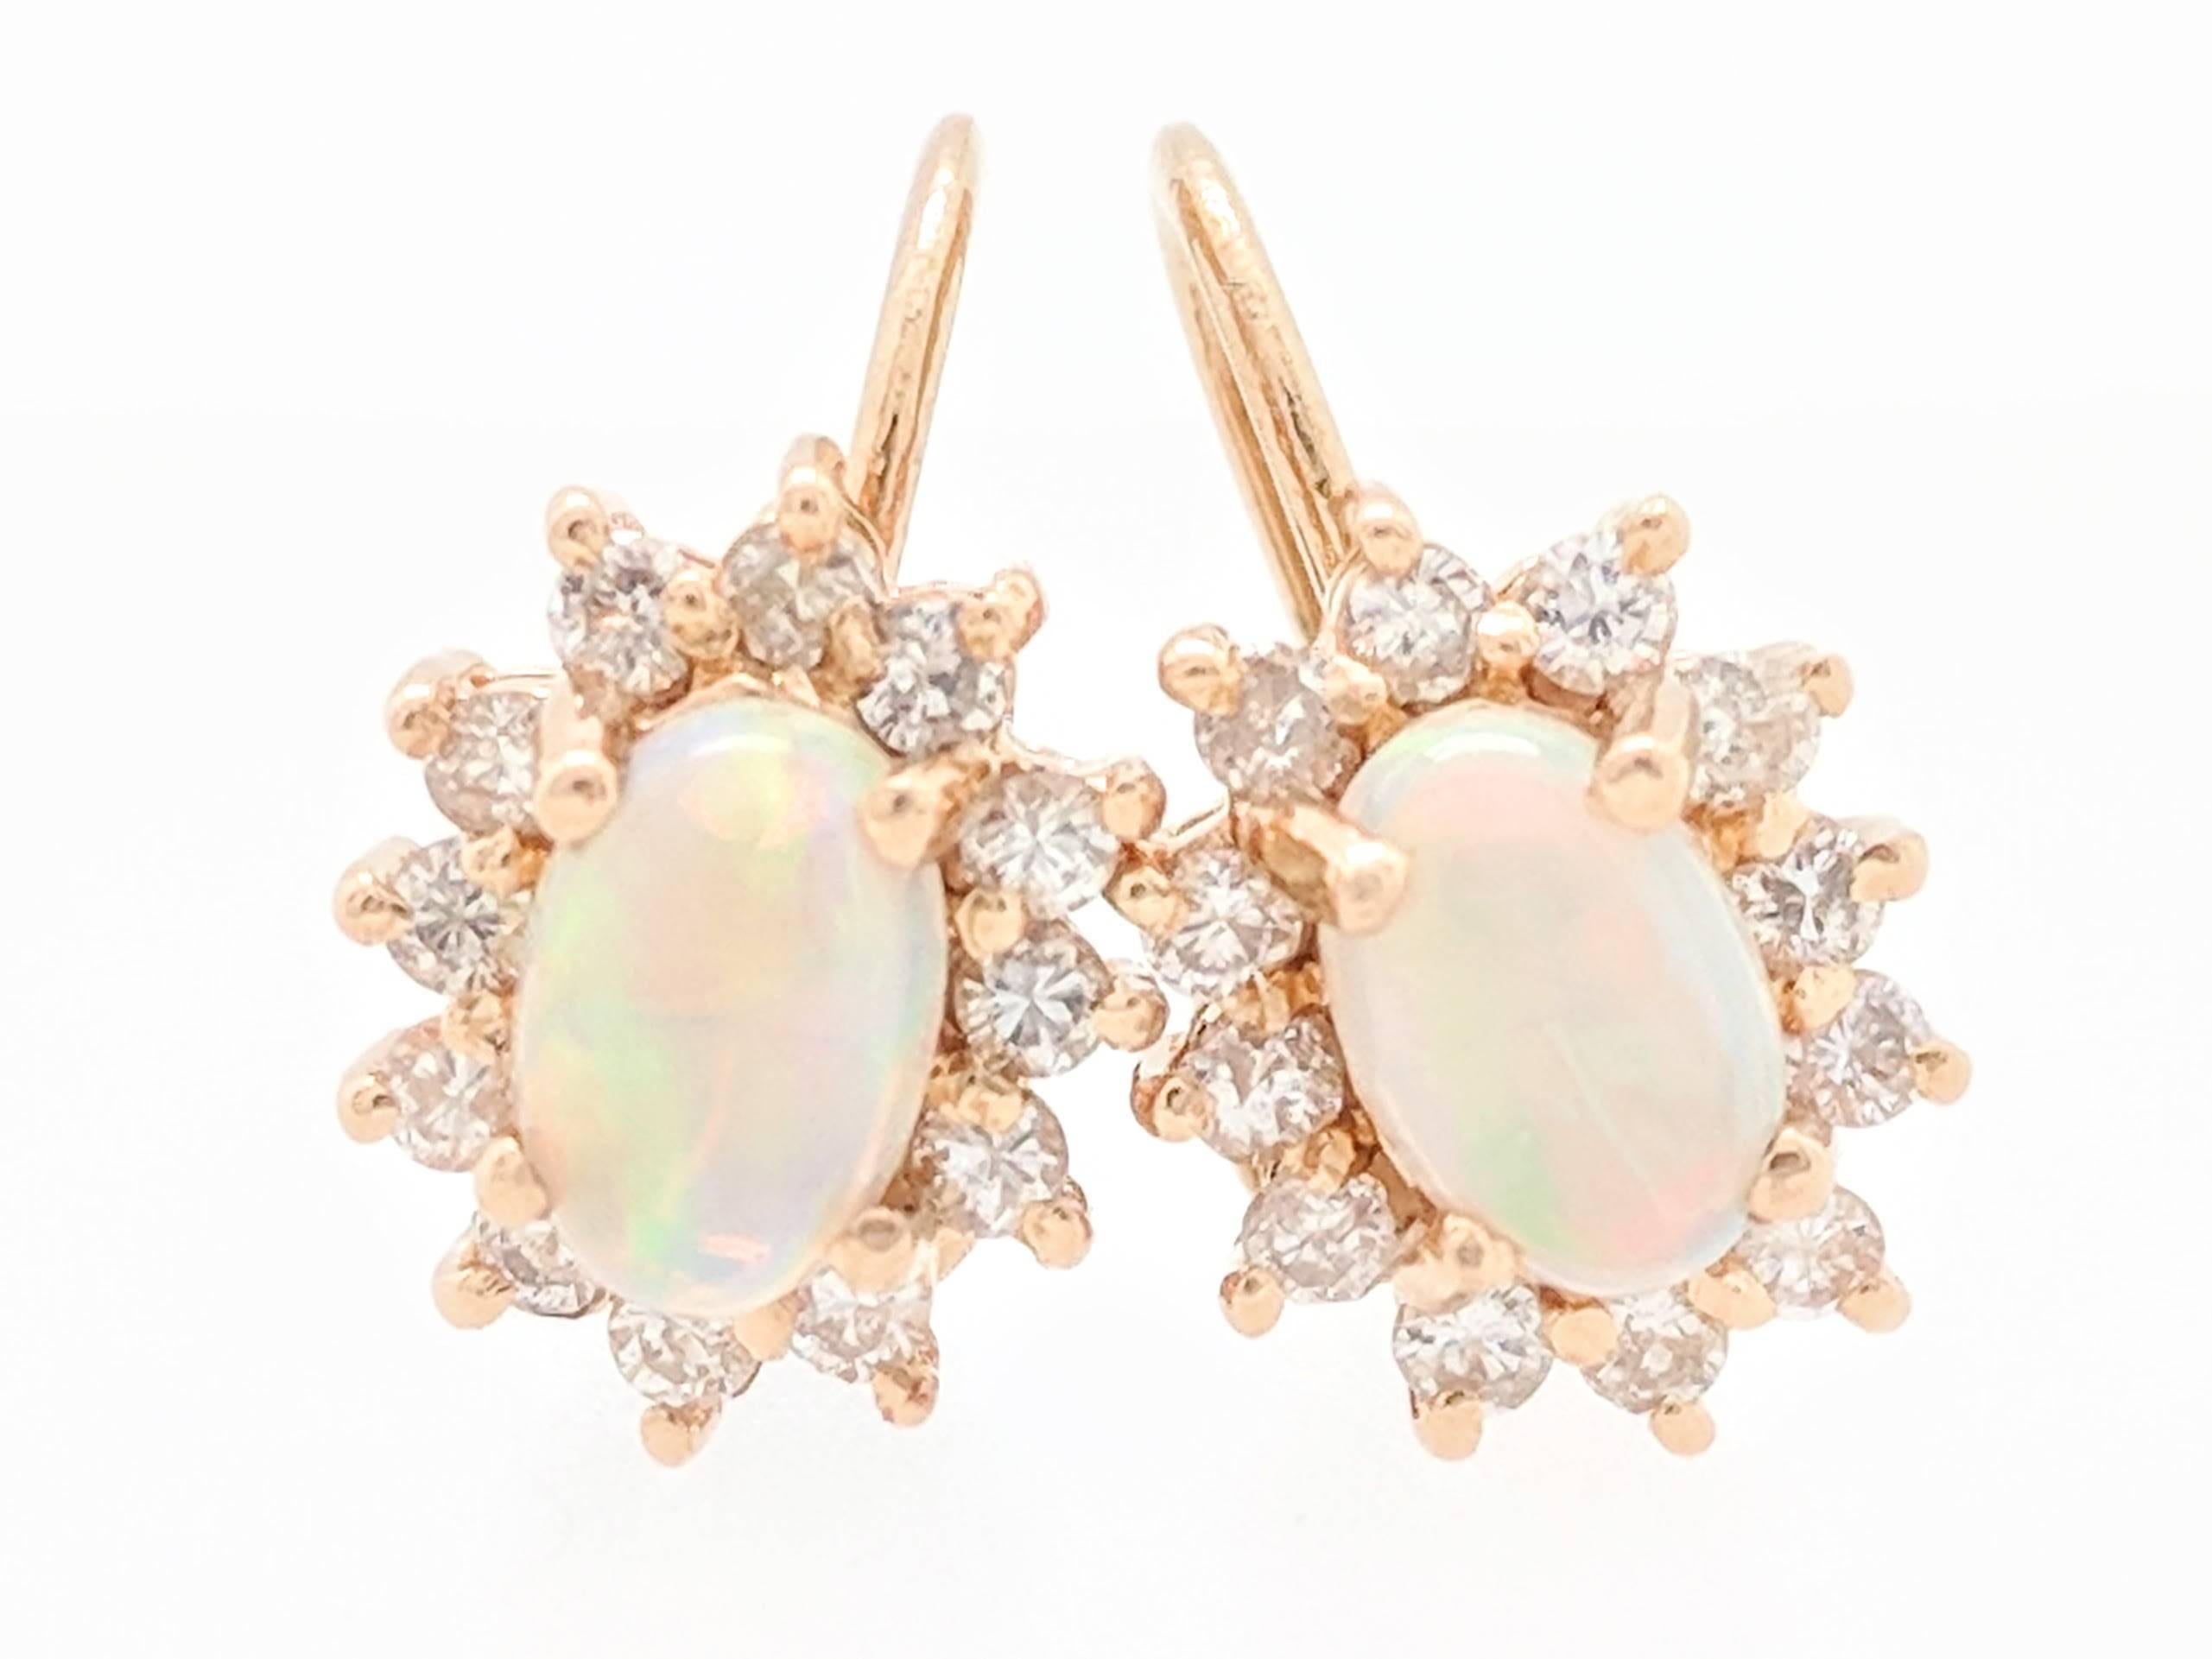 Vintage 14k Yellow Gold 1ctw Opal & Diamond Screw Back (Non-Pierced) Earrings

You are viewing a Beautiful Pair of Vintage Opal & Diamond Screw Back (Non-Pierced) Earrings. These earrings are crafted from 14k yellow gold and weigh 2.4 grams. They